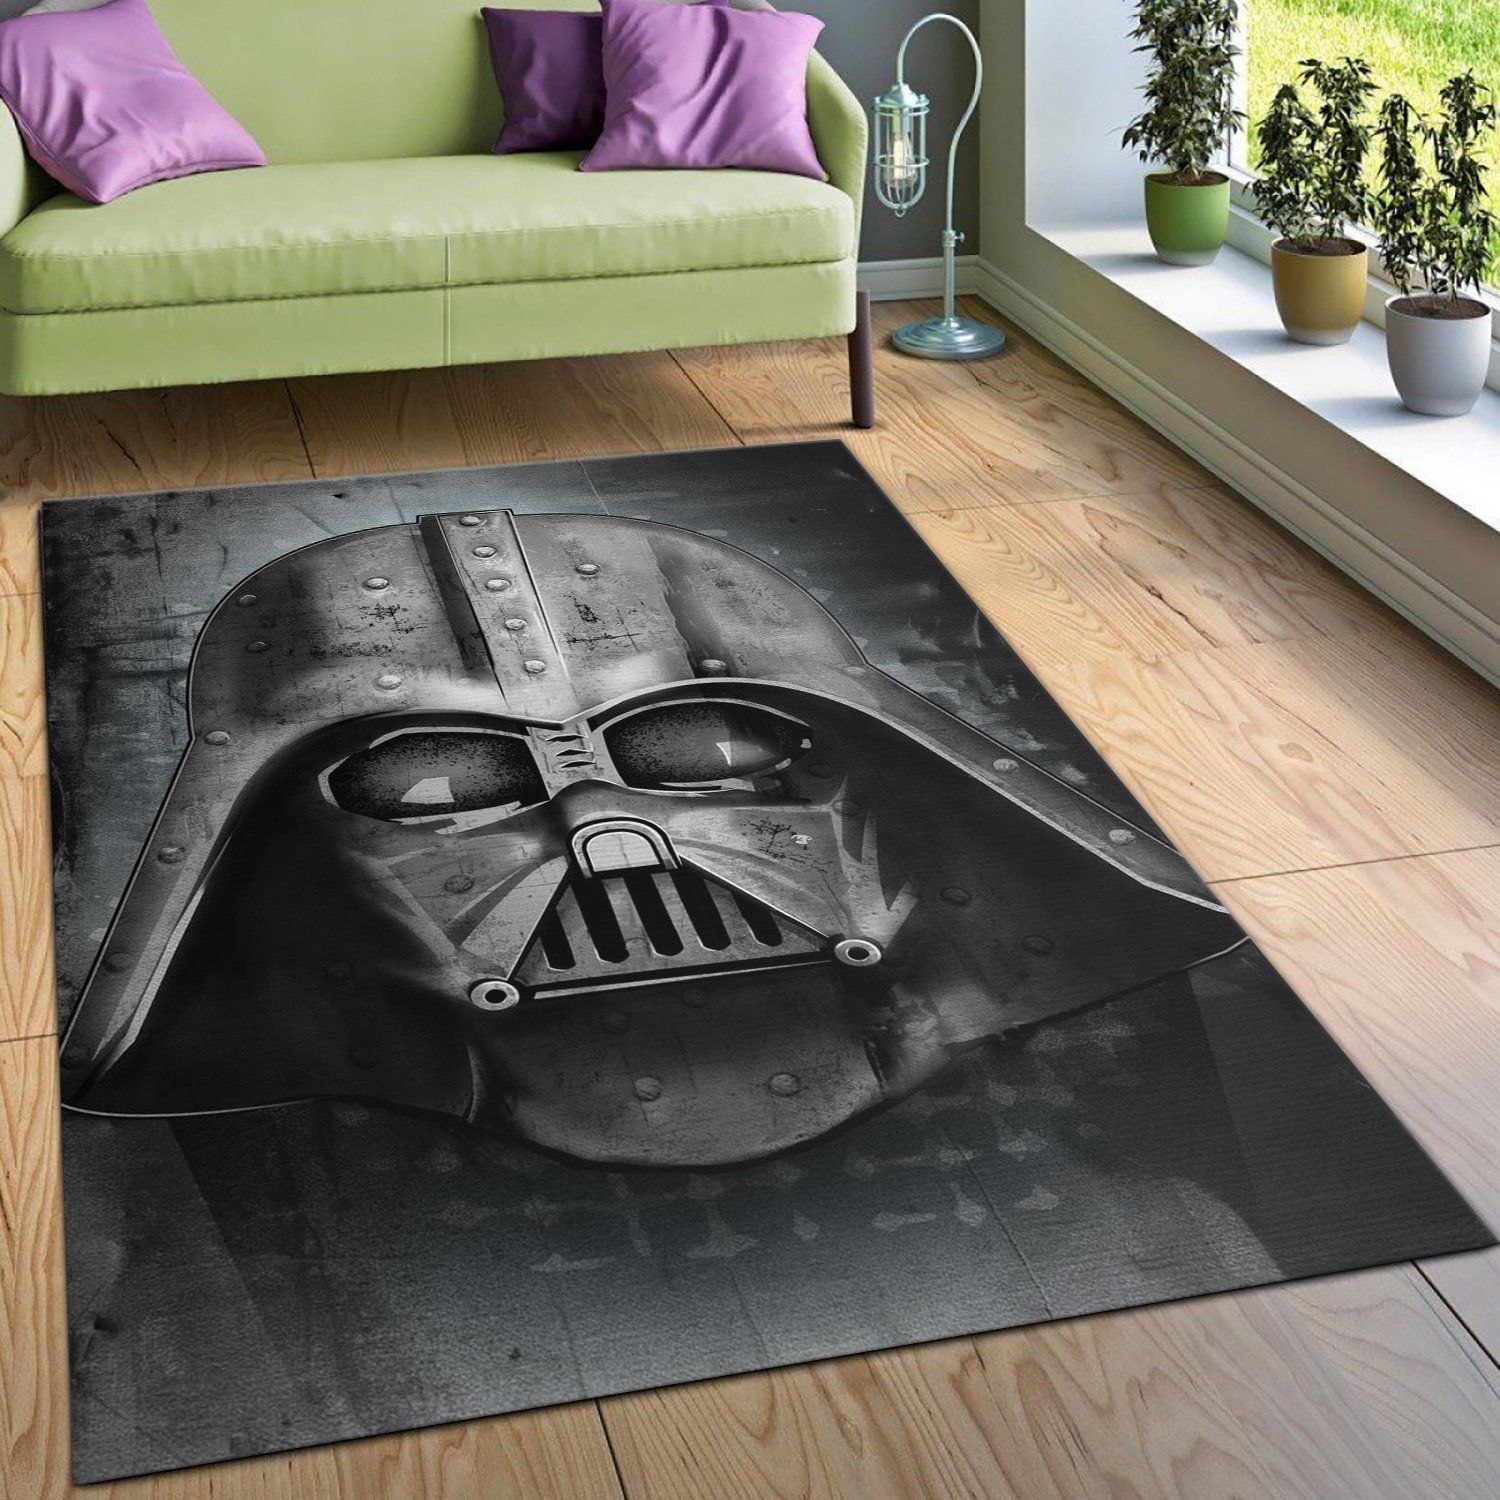 Vader Irontrooper Area Rug Star Wars Visions Of Darth Vader Rug Family Gift US Decor - Indoor Outdoor Rugs 2